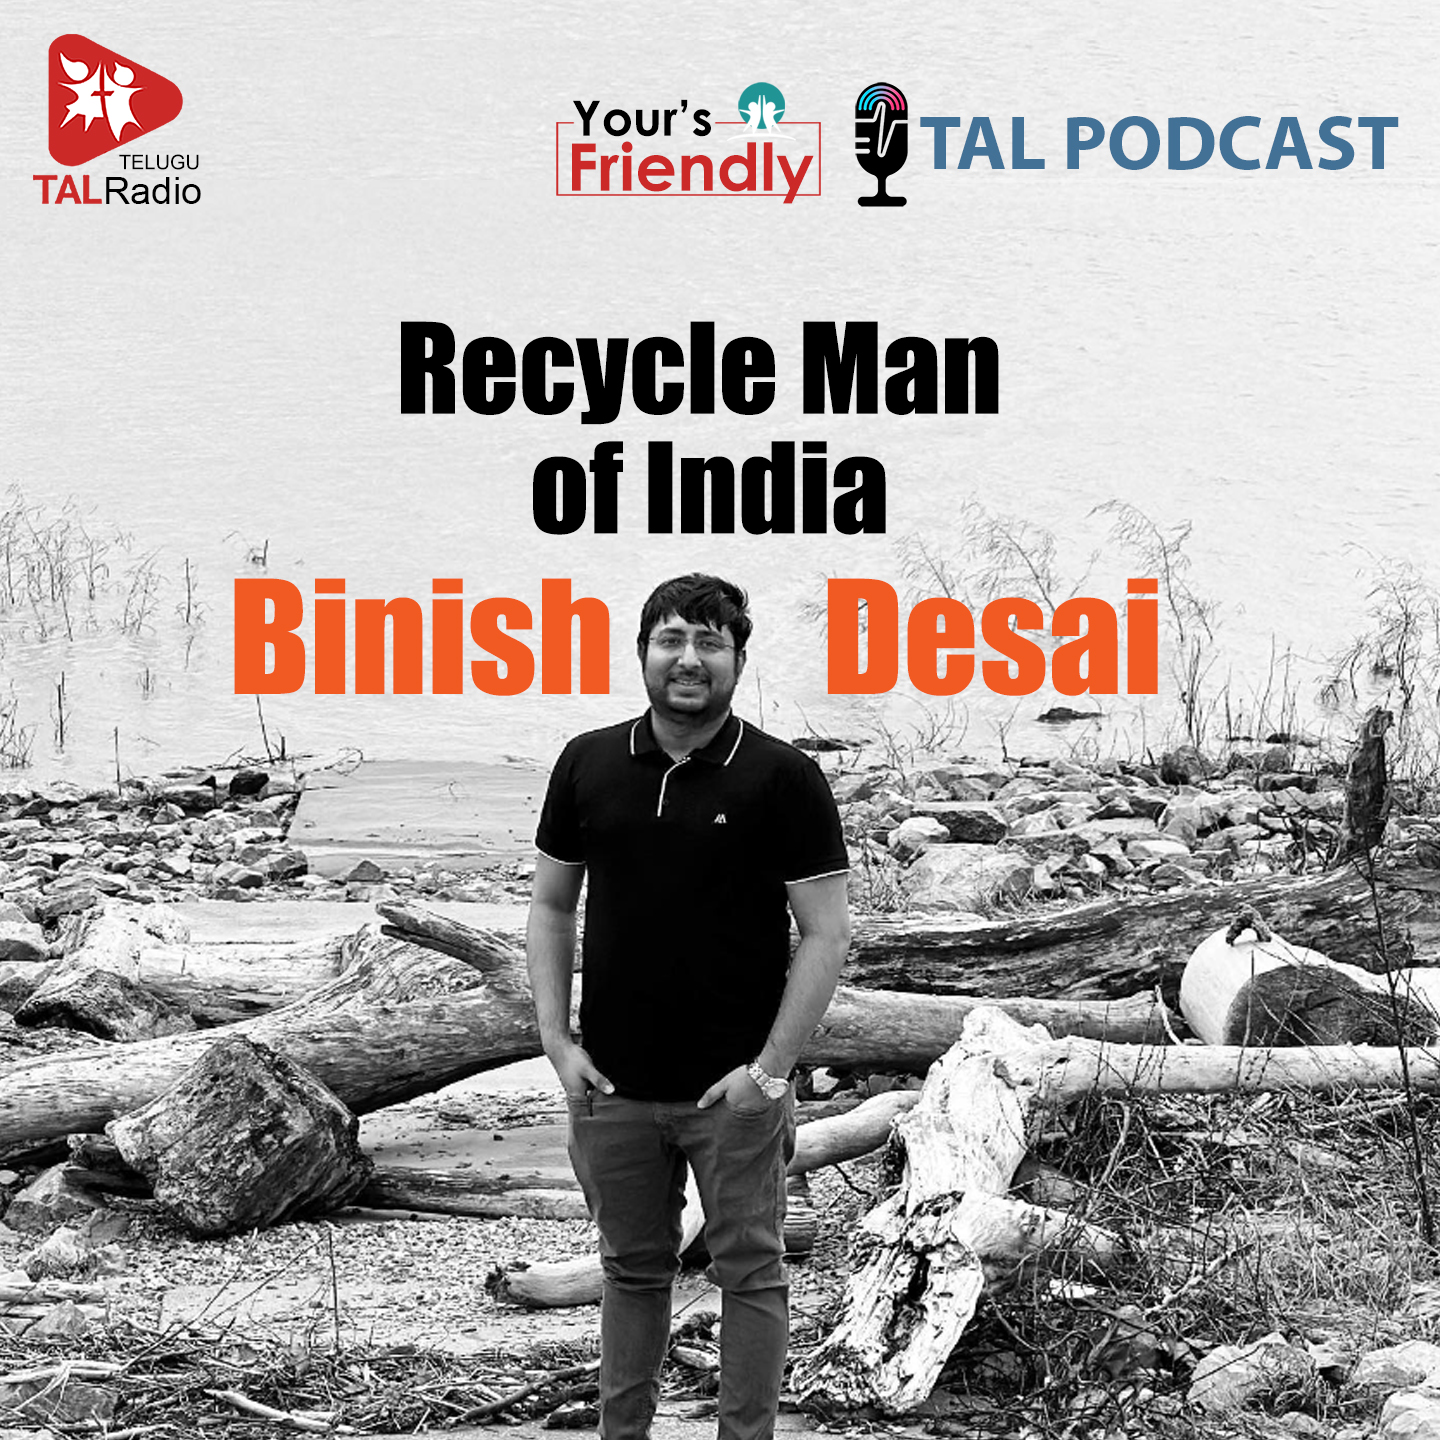 Recycle Man of India - Binish Desai | Your's Friendly